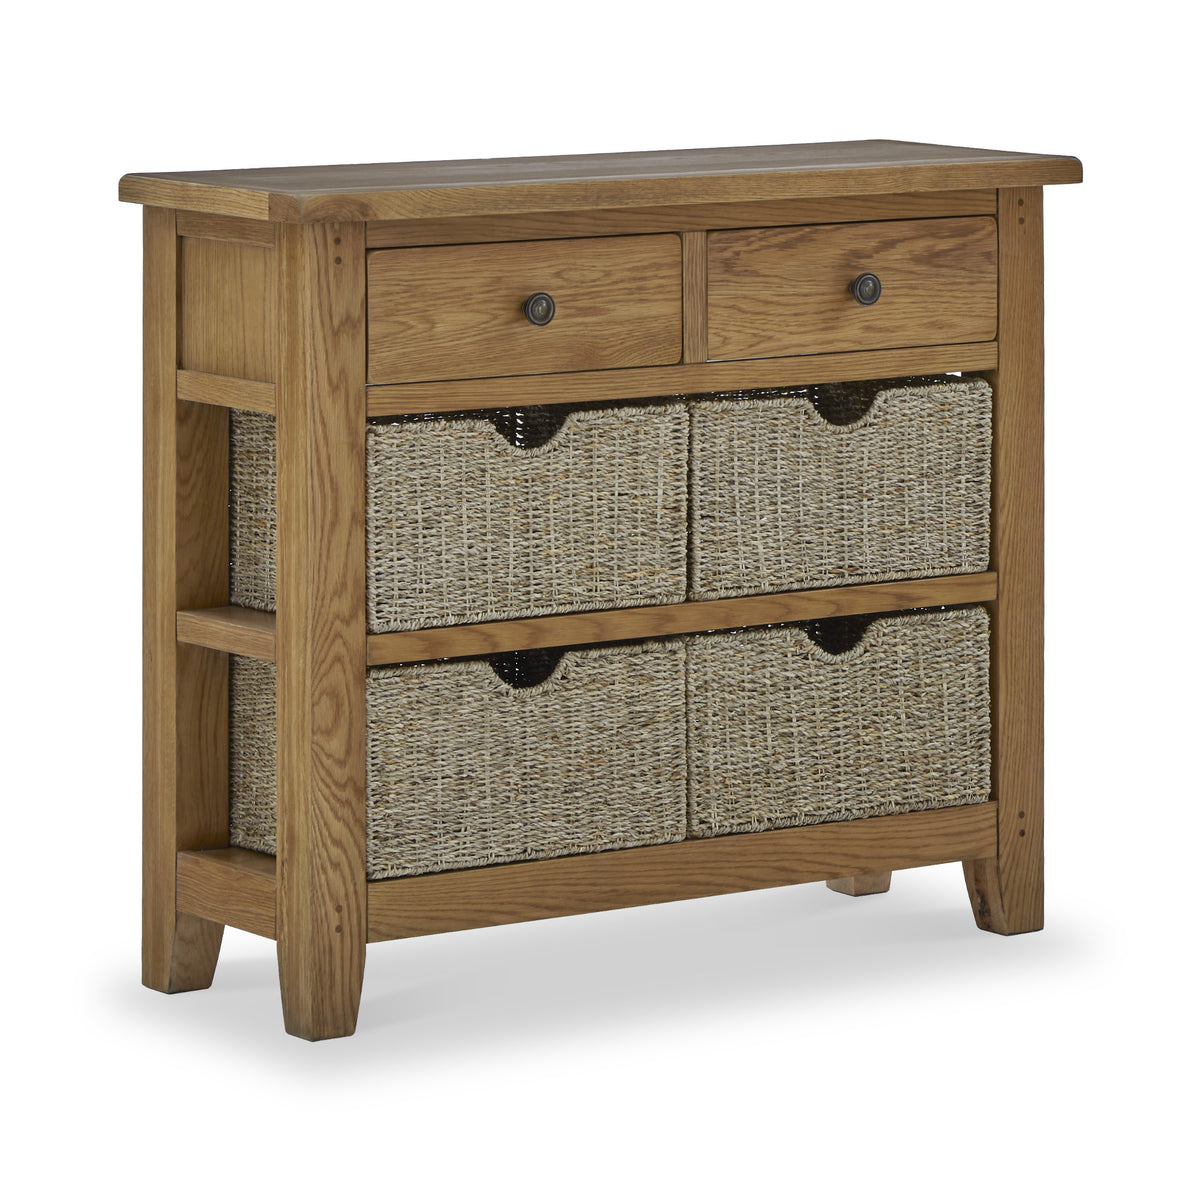 Broadway Oak Console Table with Baskets from Roseland Furniture